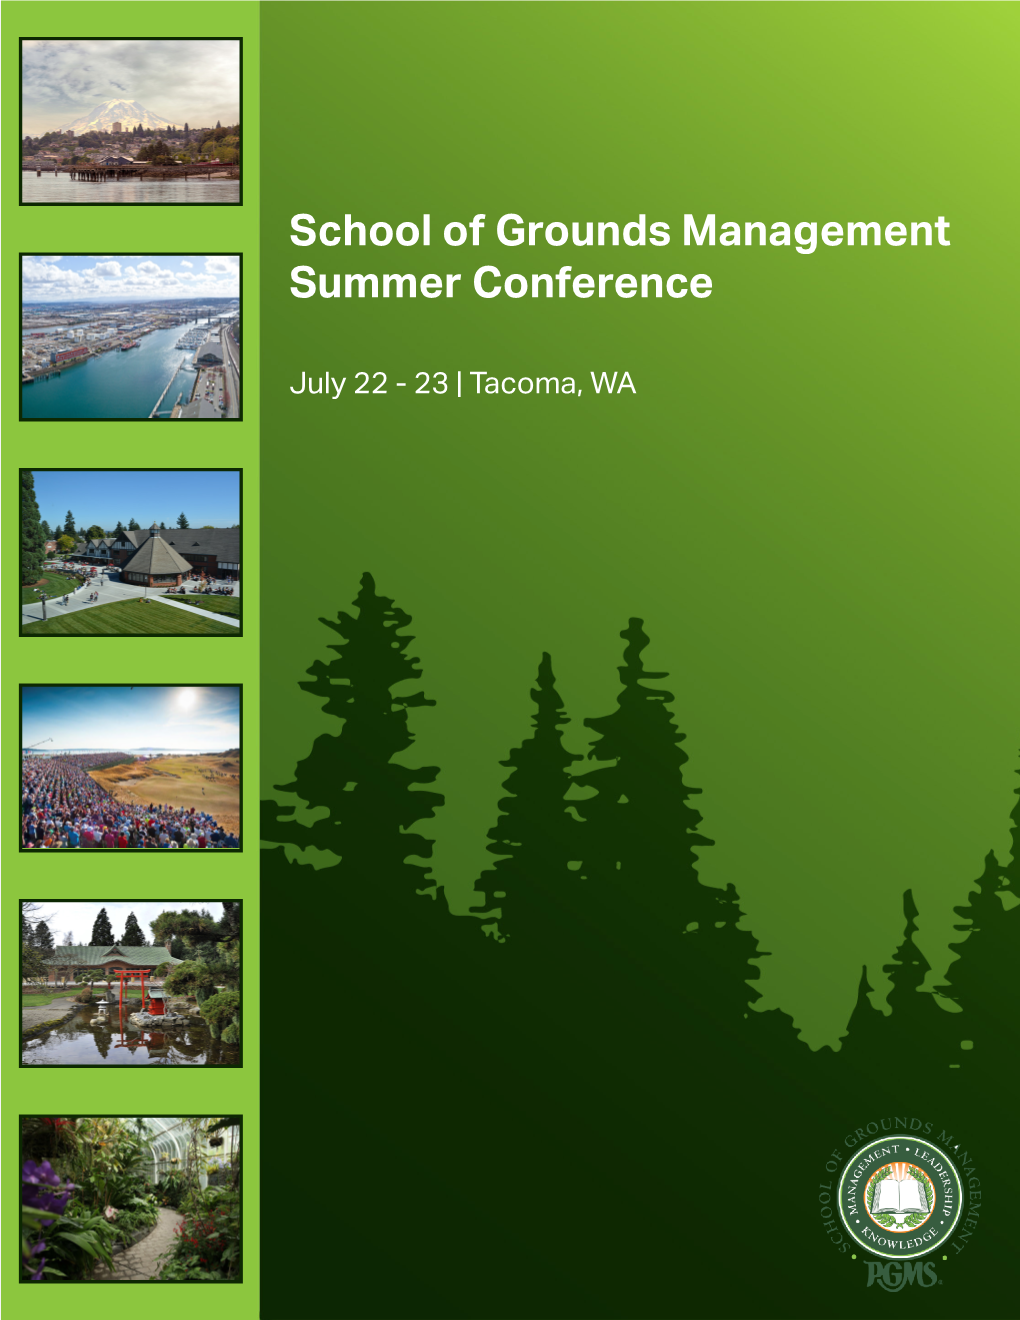 School of Grounds Management Summer Conference